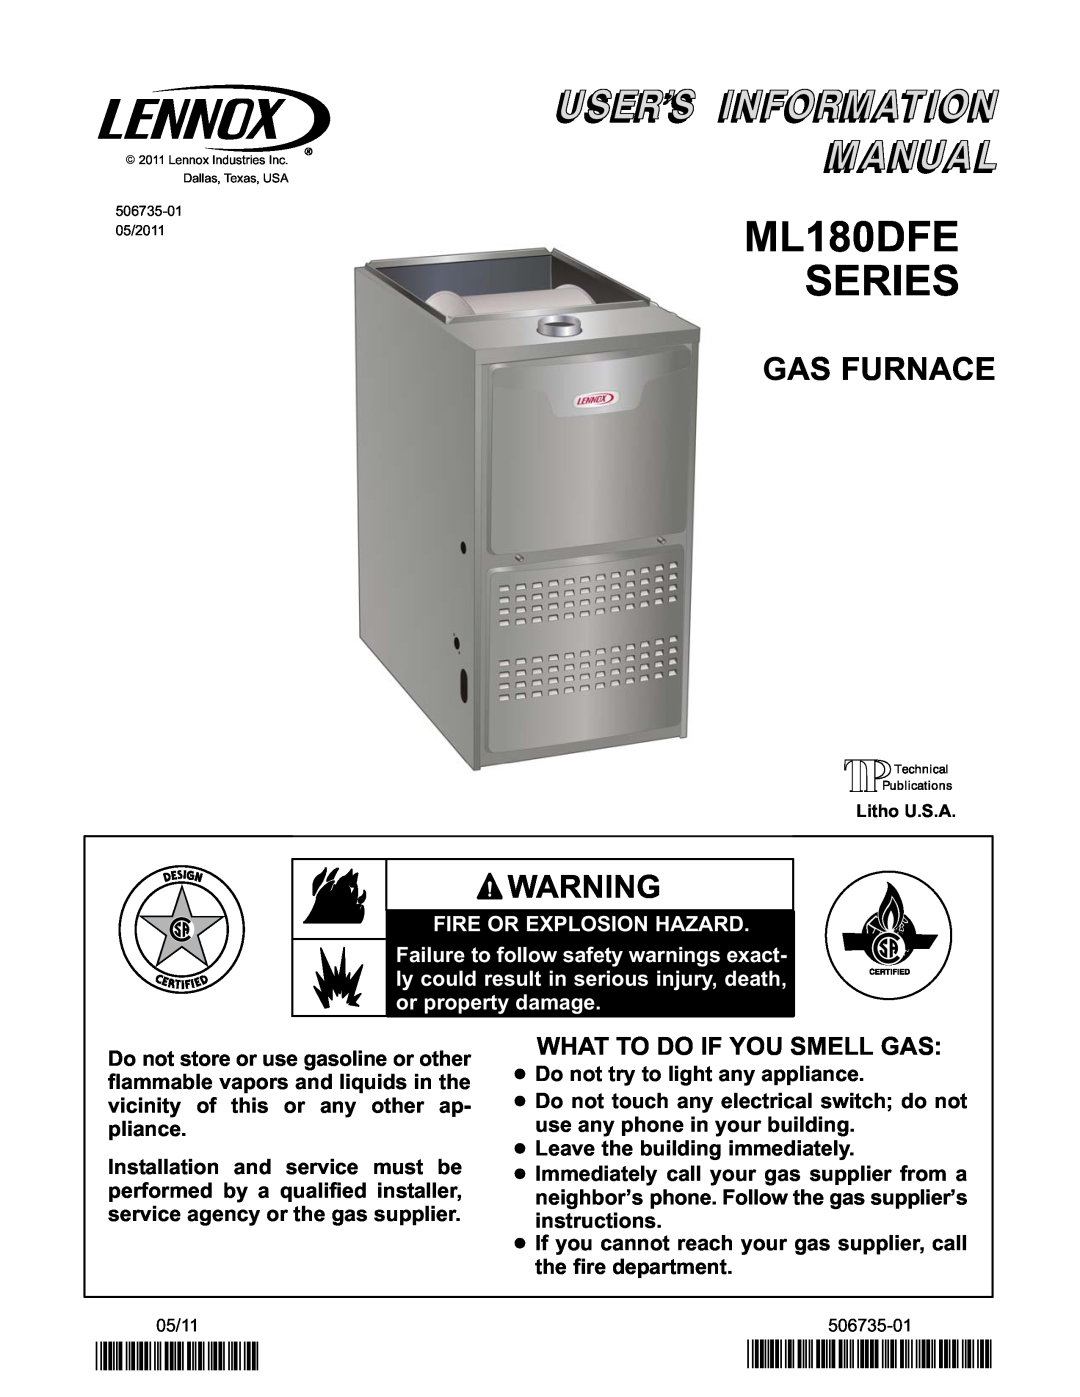 Lennox International Inc ML180DFE SERIES manual Gas Furnace, 2P0511, P506735-01, What To Do If You Smell Gas 